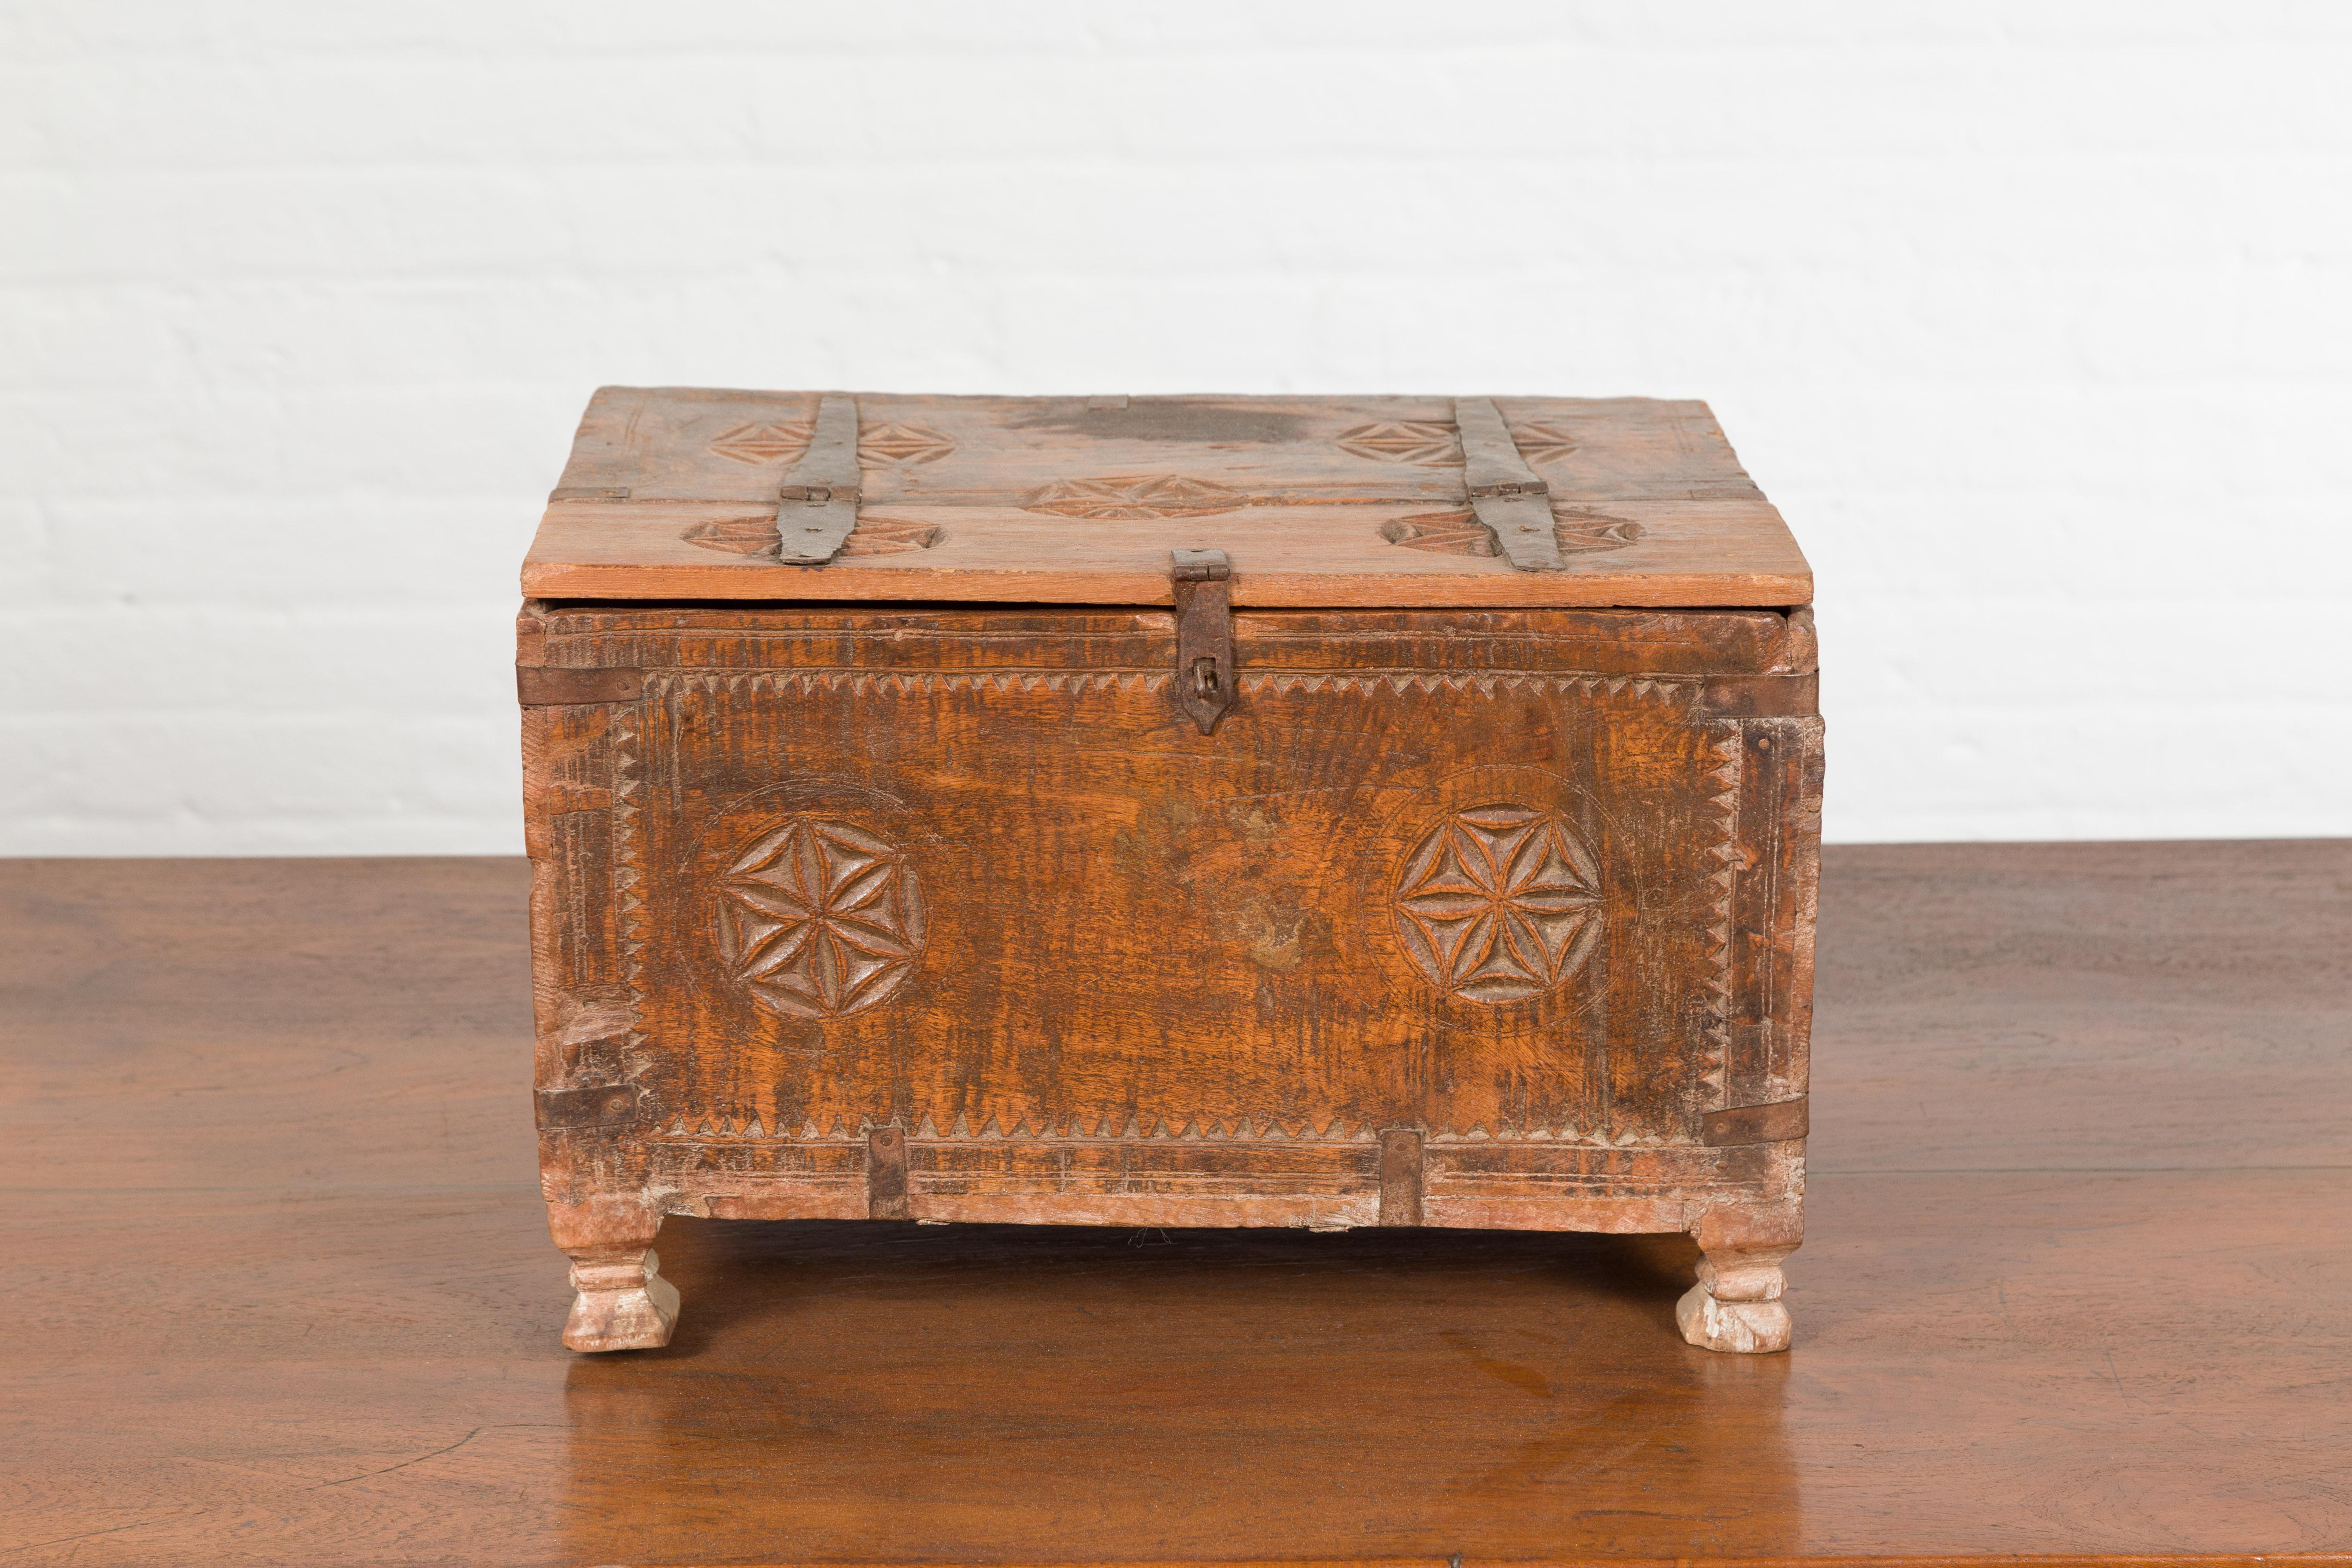 An Indian small wooden box from the 19th century, with iron hardware and carved rosacea. Created in India during the 19th century, this wooden box features a rectangular lid half opening to reveal a small interior. Accented with iron details and